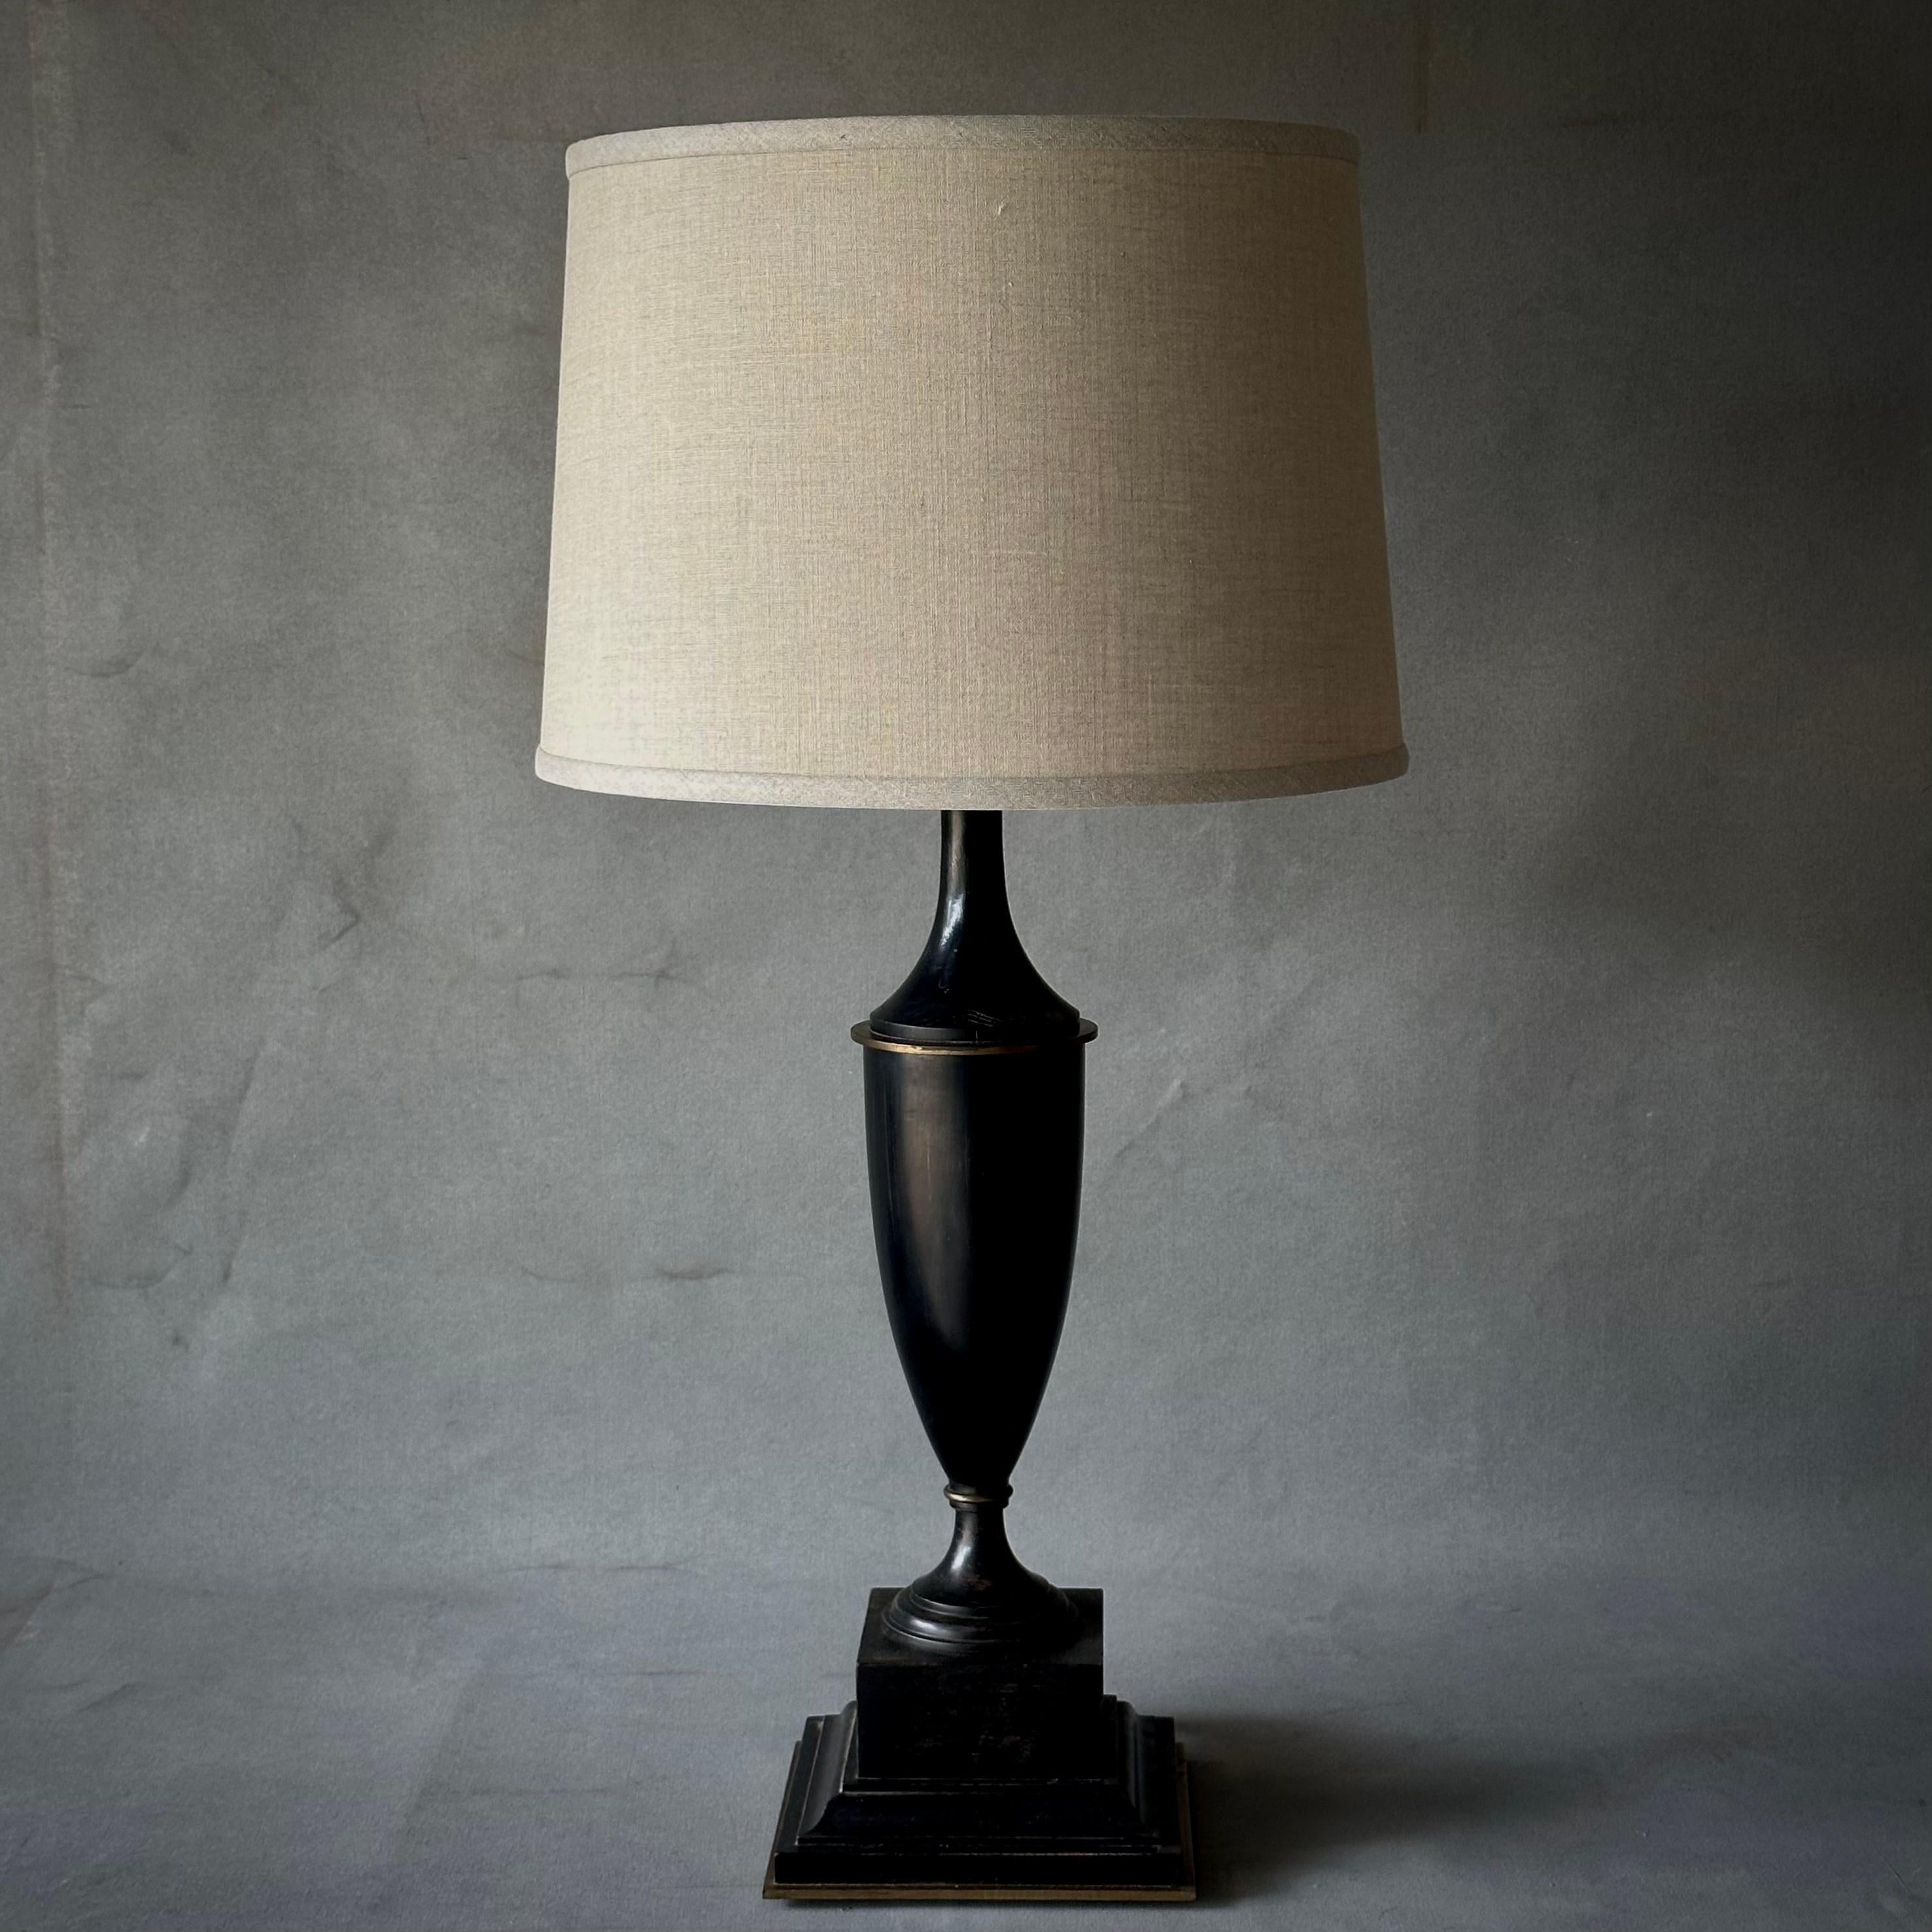 Early 20th Century French Neoclassical Table Lamp